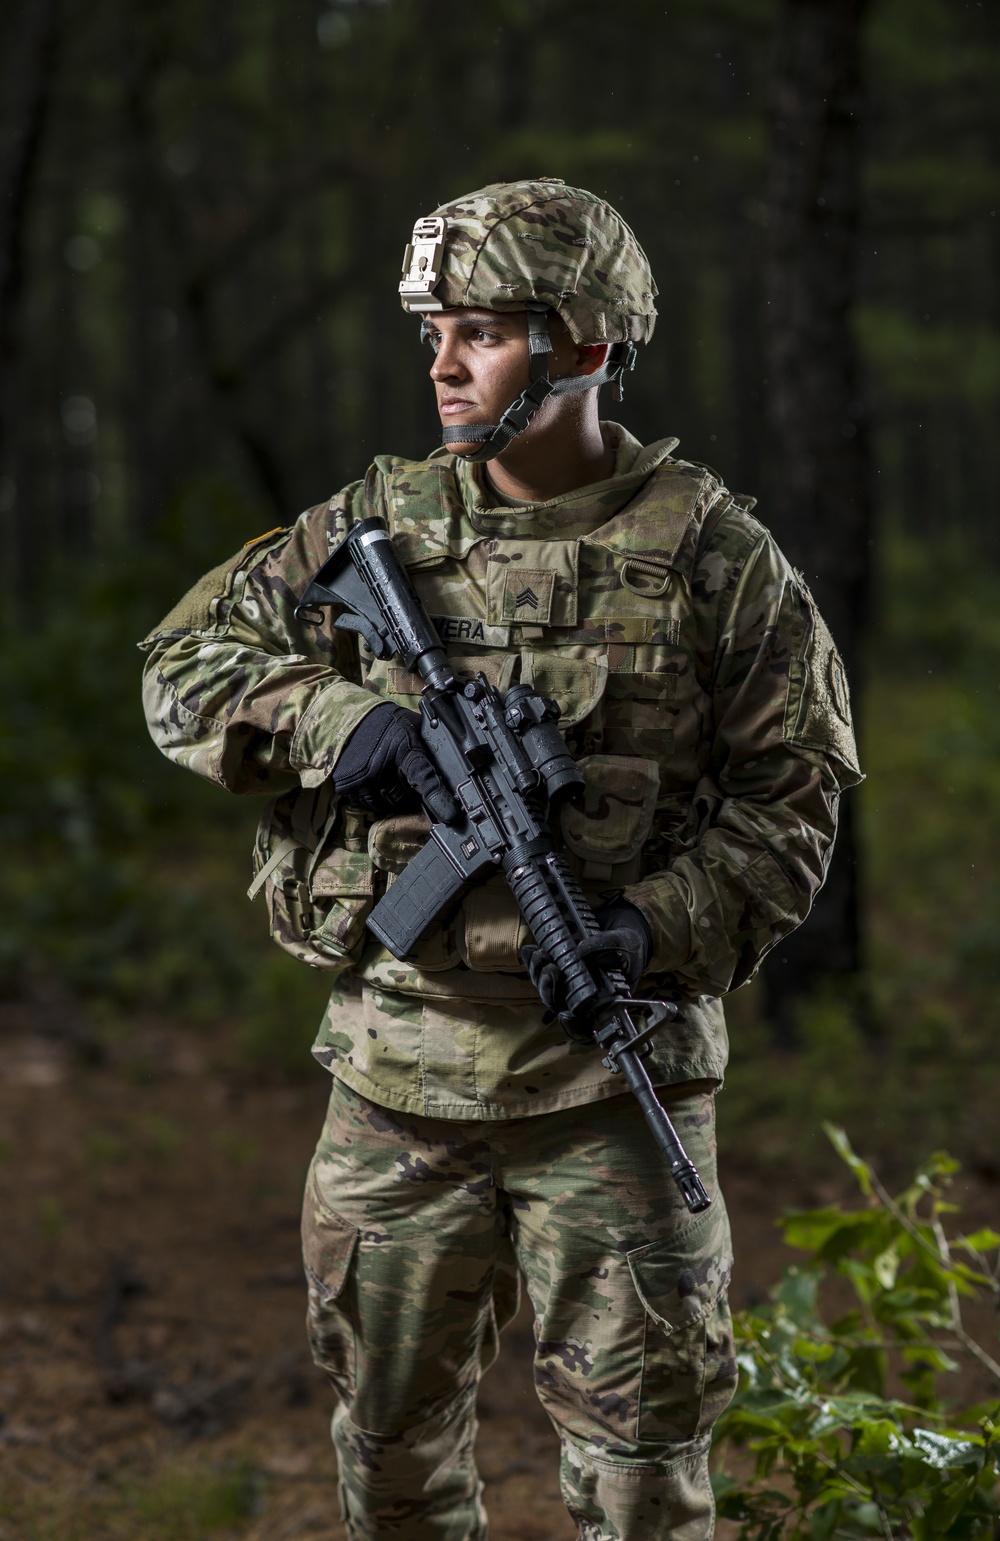 DVIDS - Images - U.S. Army Reserve lethal, combat ready [Image 3